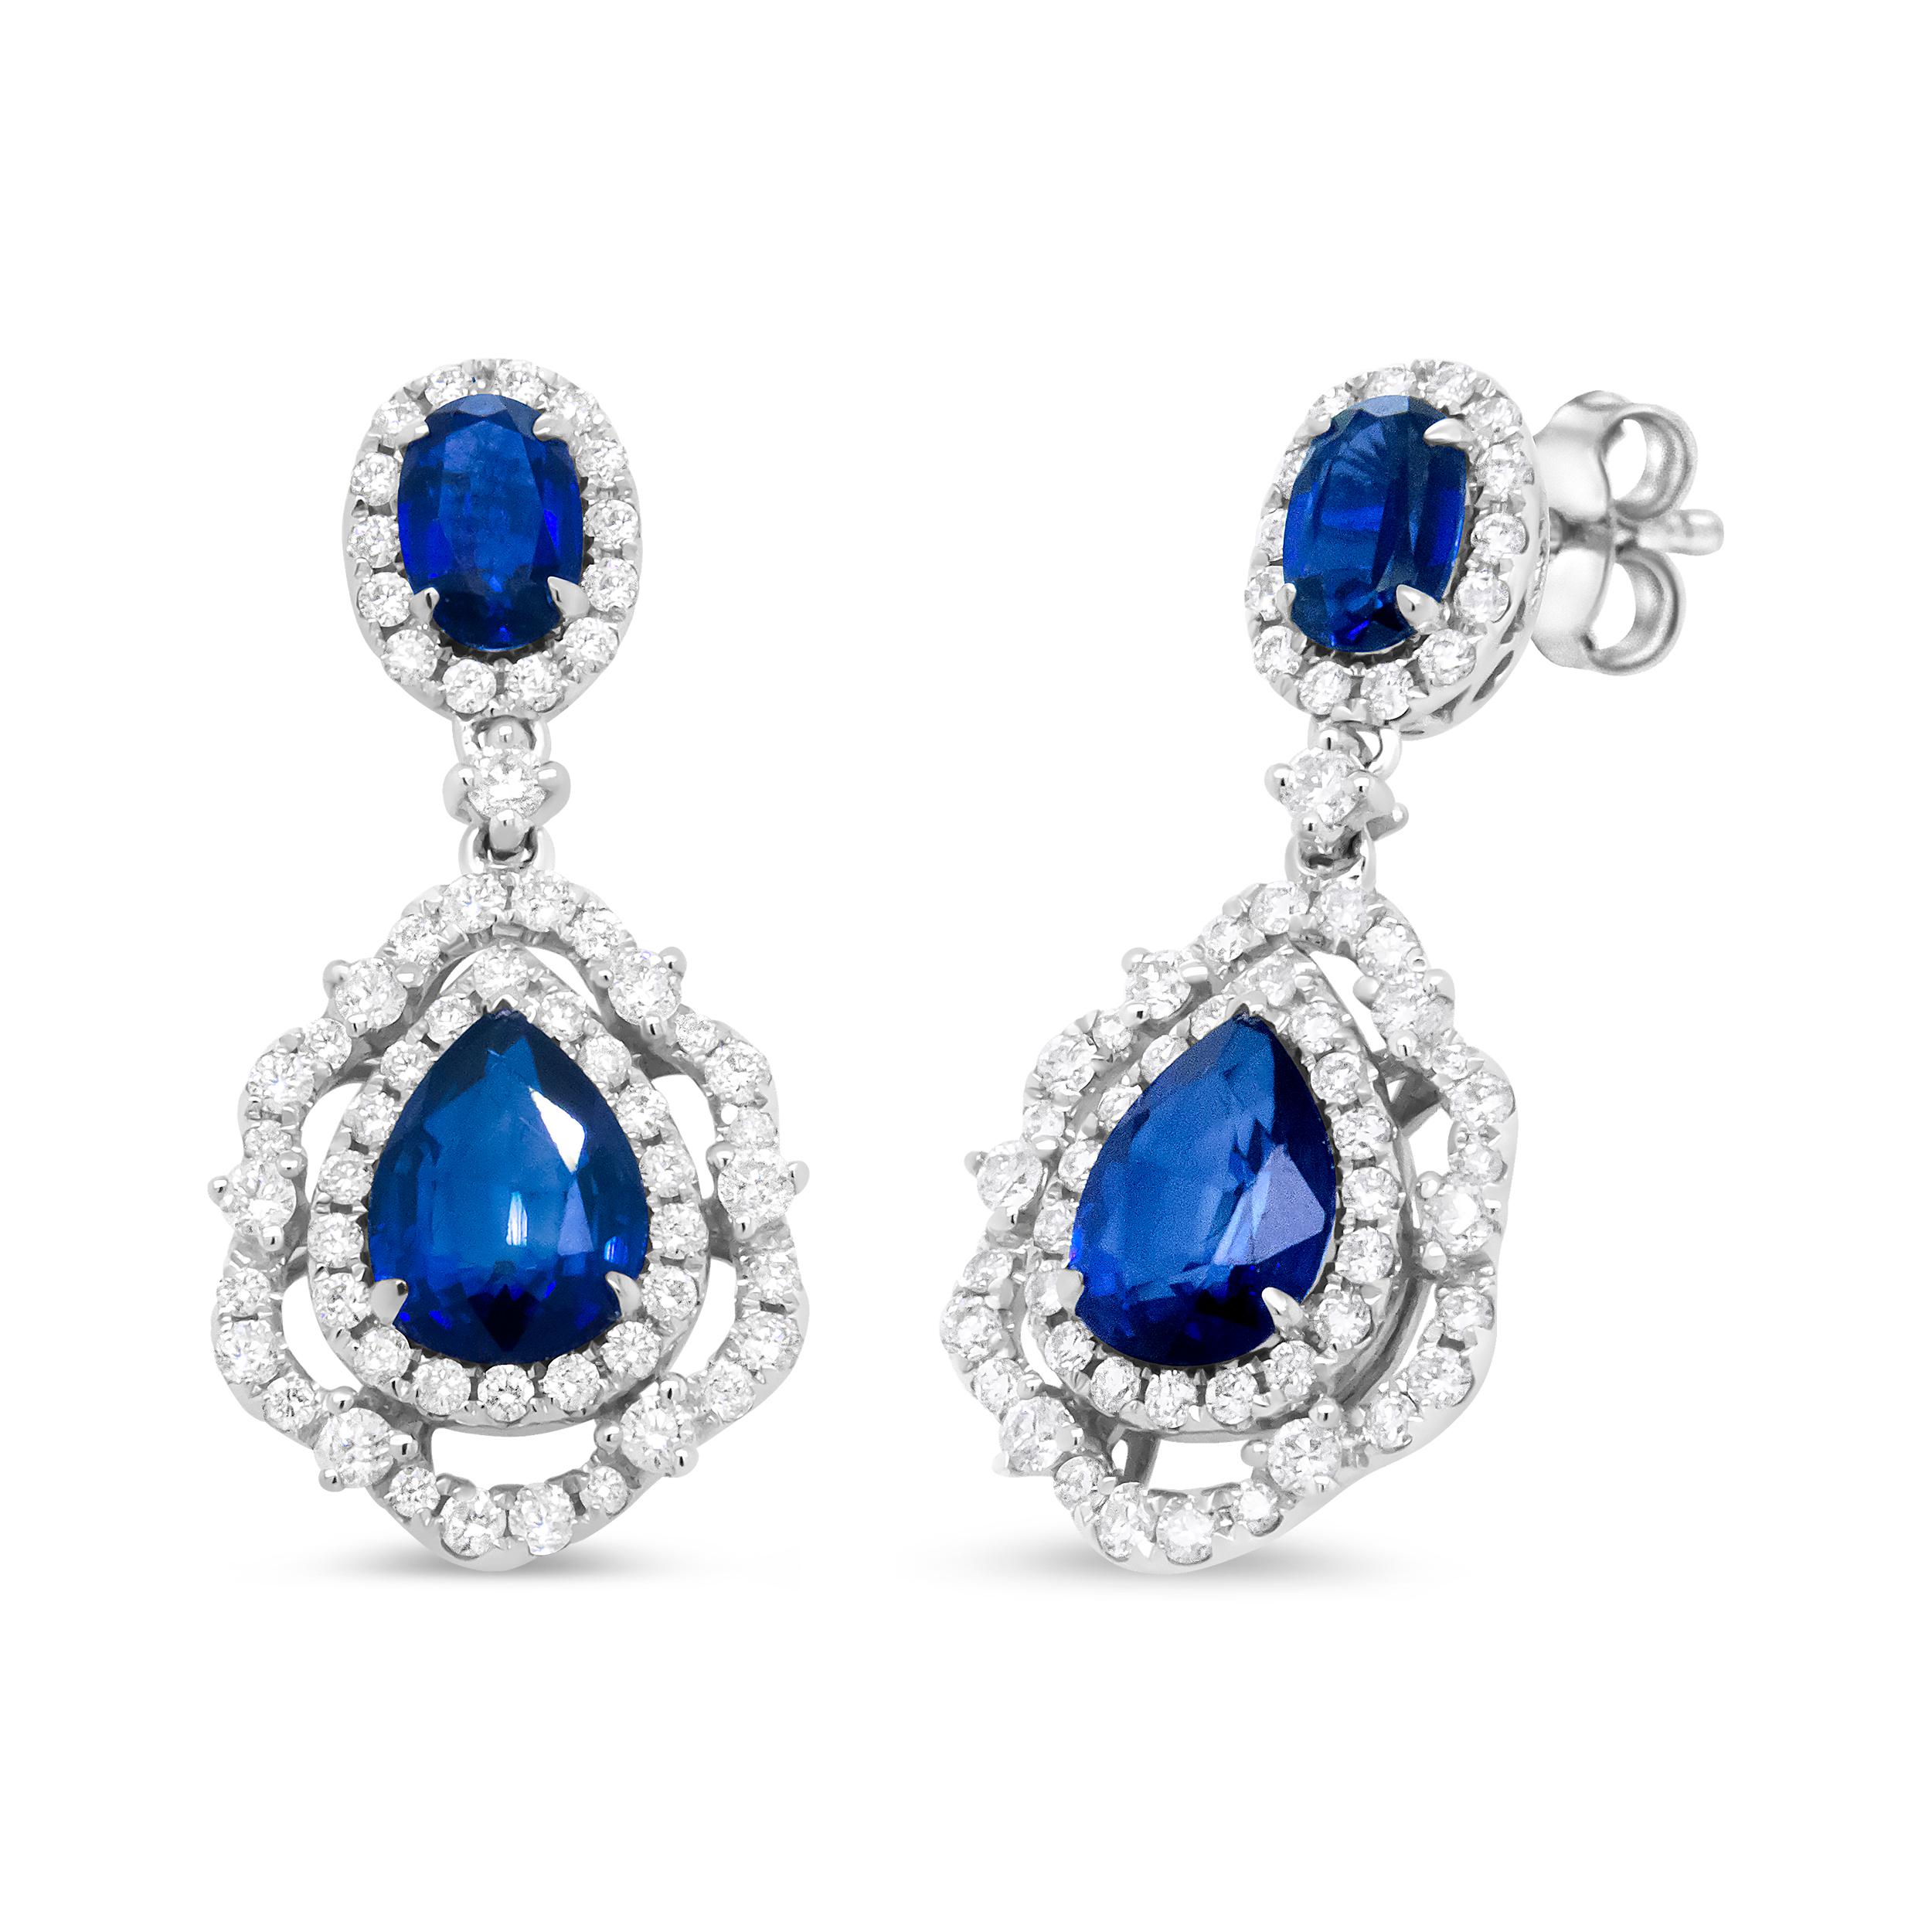 A stunner at every angle, this pair of dangle drop earrings is bathed in the sparkle of gemstones and diamonds. The upper dangle is centered by a magnificent  5.5 x 3.5 oval-cut tanzanite in a color-treated blue. A halo of glittering round diamonds